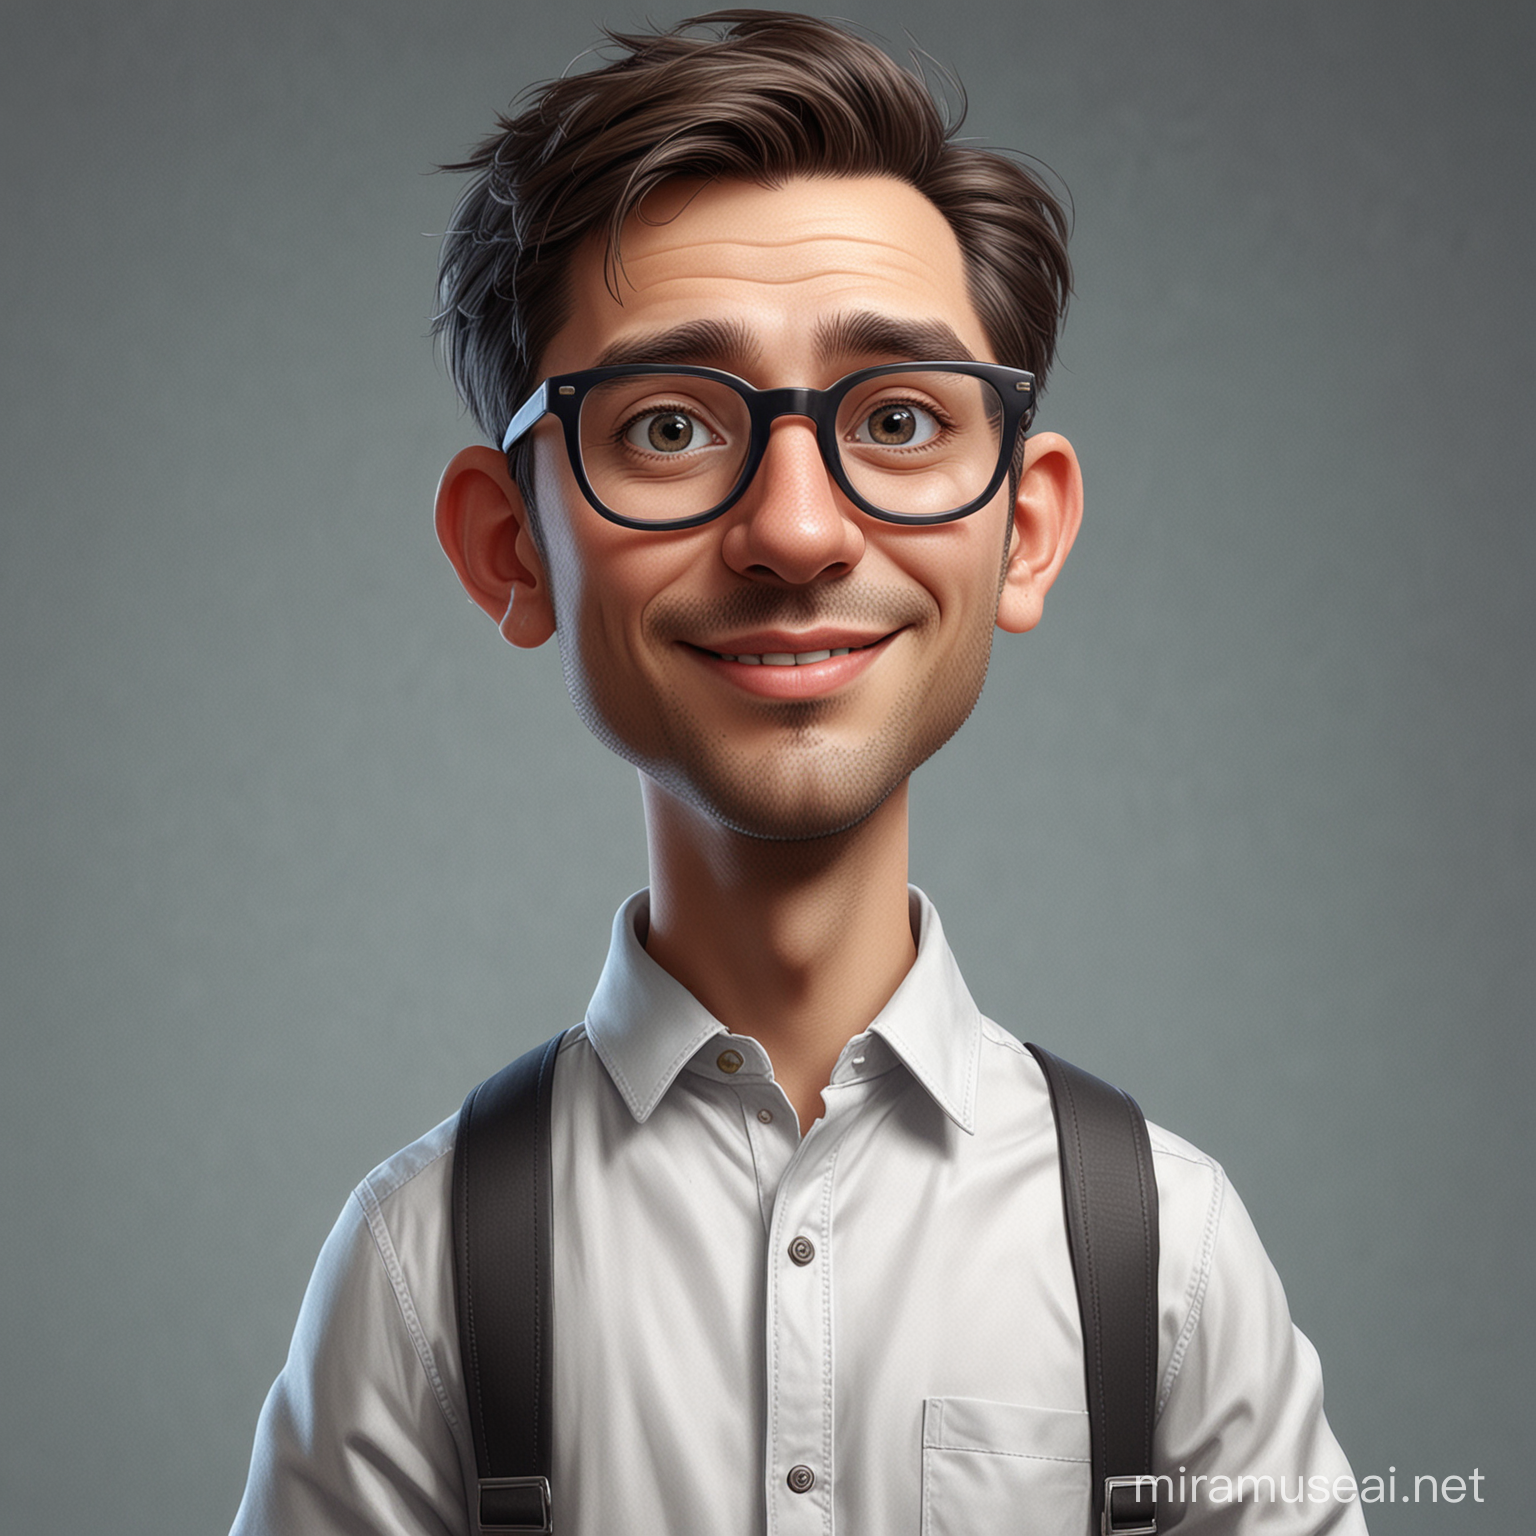 Whimsical Caricature Playful Male Character in Glasses